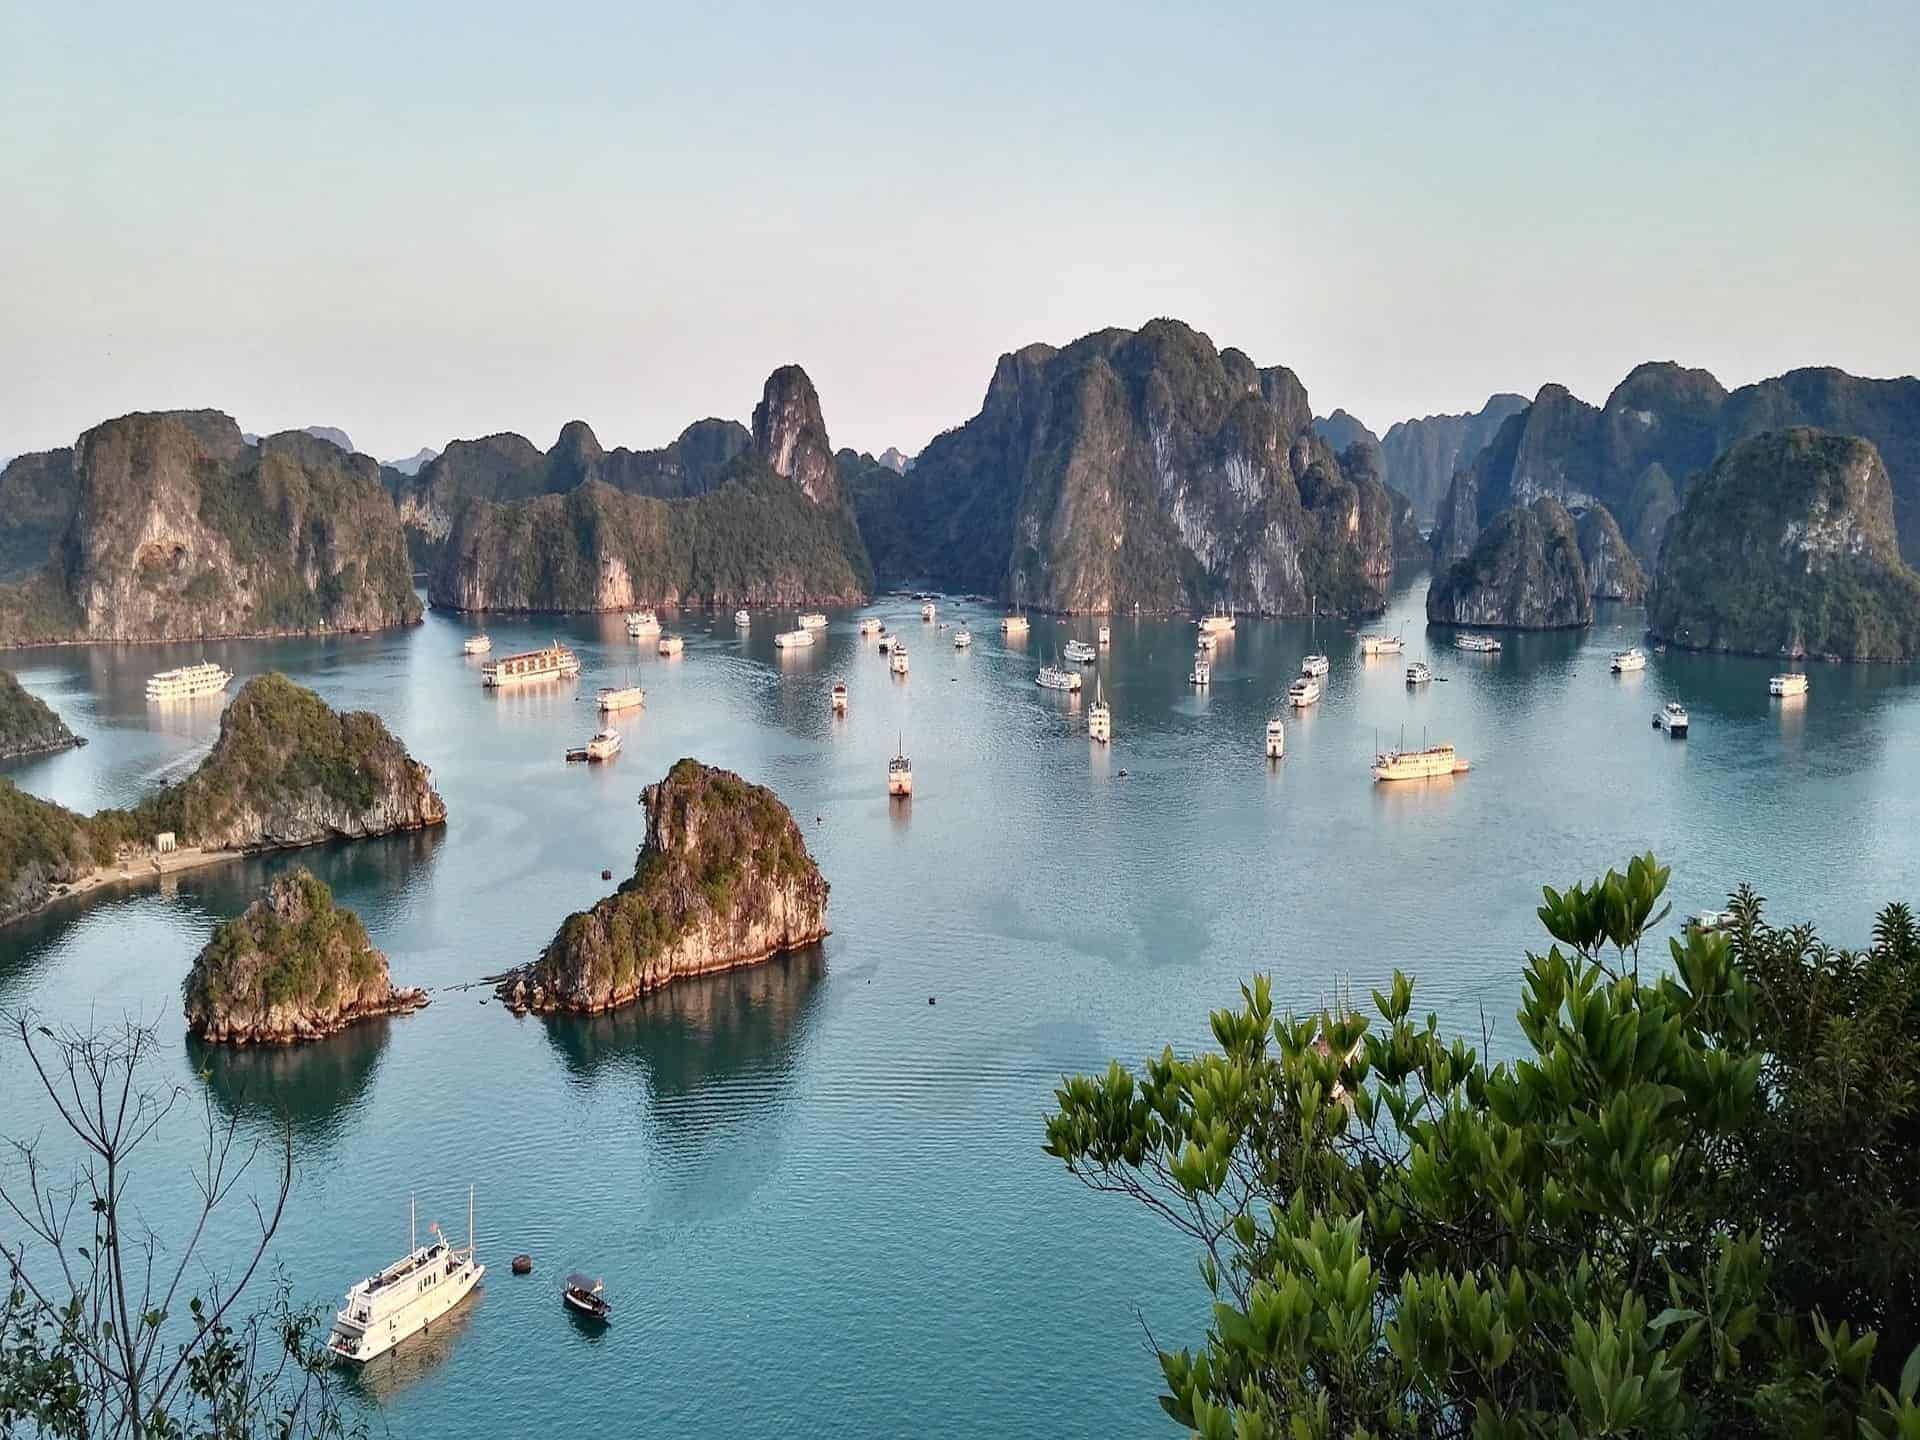 Looking for an unforgettable adventure without breaking the bank, budget-friendly tours to Halong Bay will immerse you in breathtaking scenery and local culture.